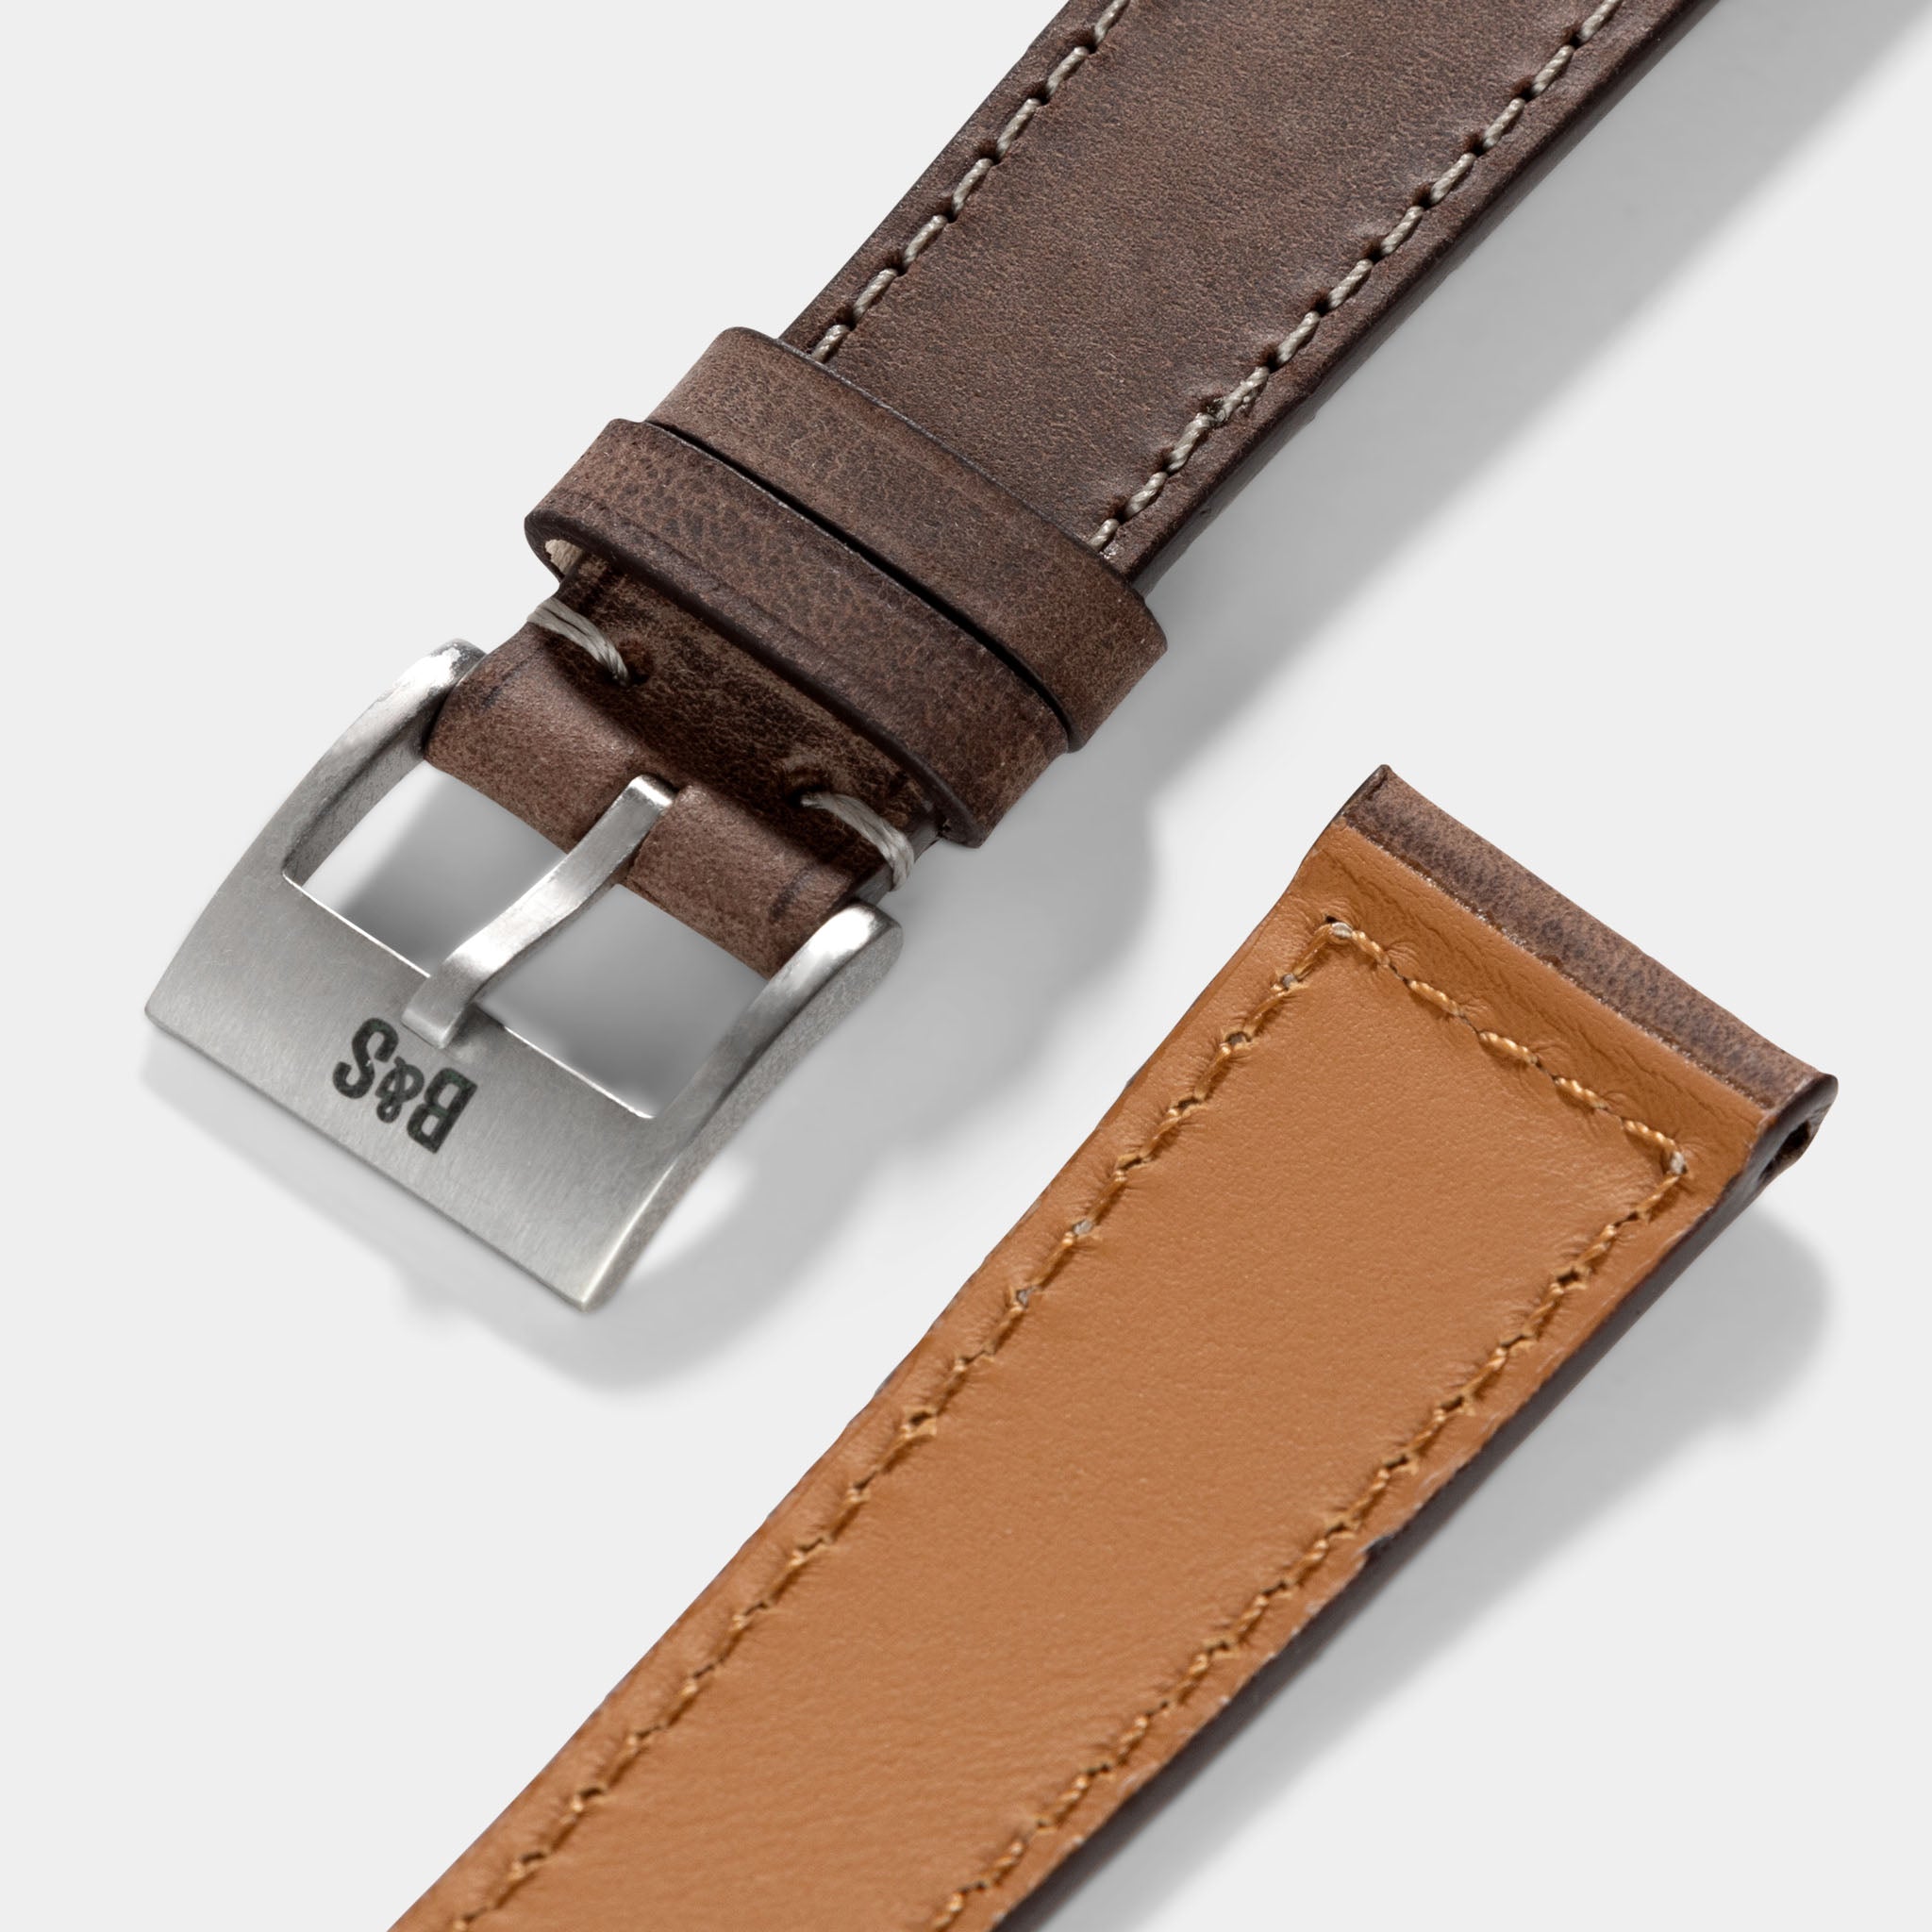 Soil_Brown_Leather_Watch_Strap_Details_For_Vintage_Wristwatches